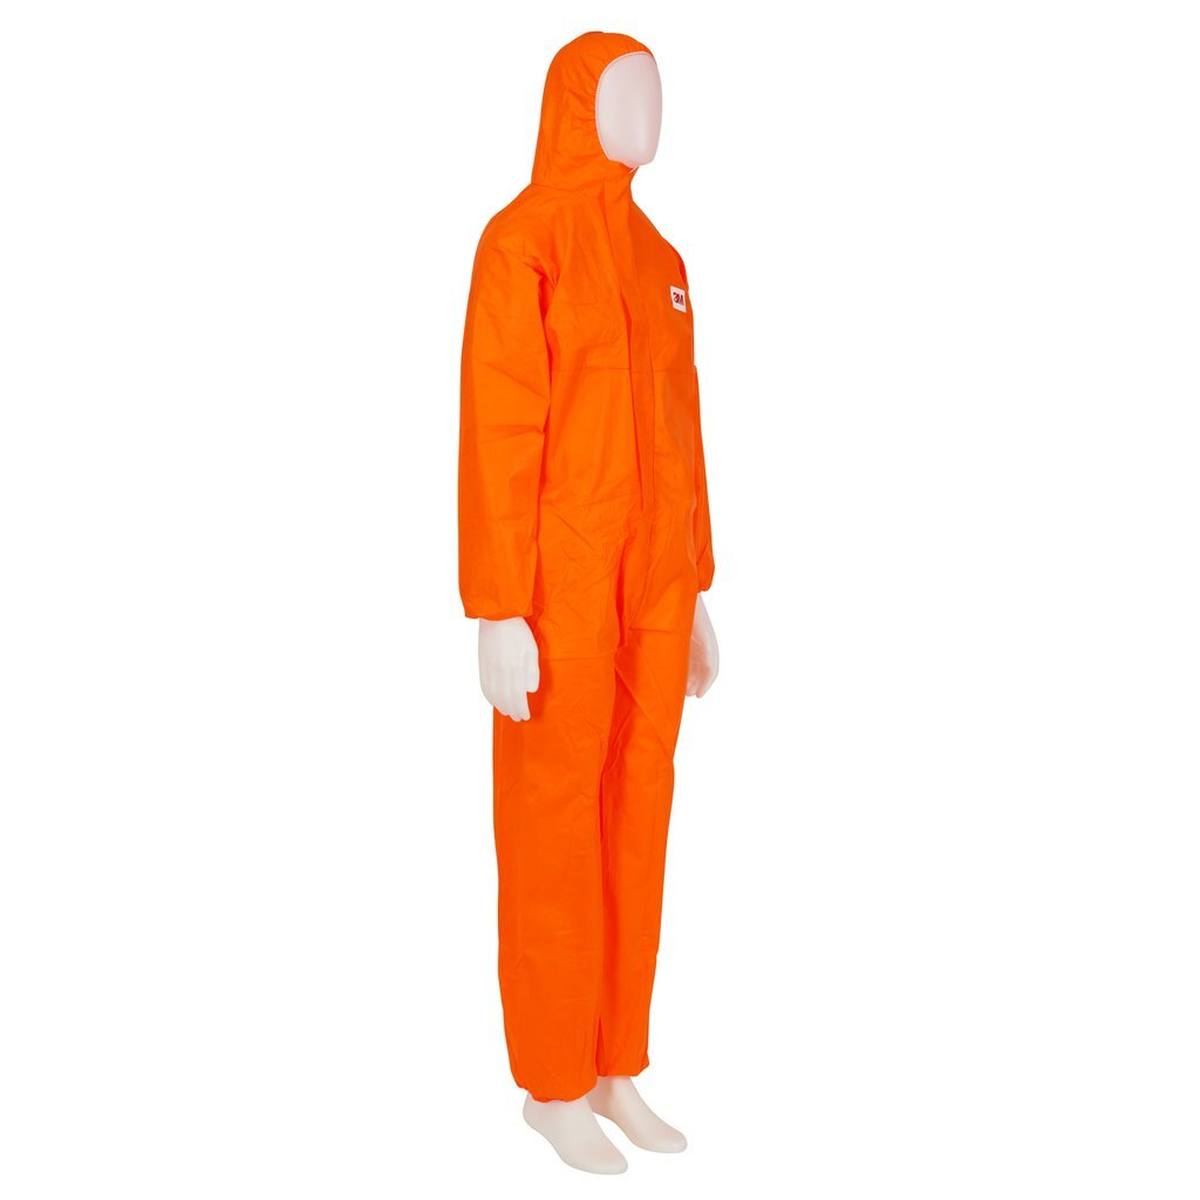 3M 4515O Protective suit, orange, TYPE 5/6, size 2XL, material SMMS low-lint, elasticated cuffs